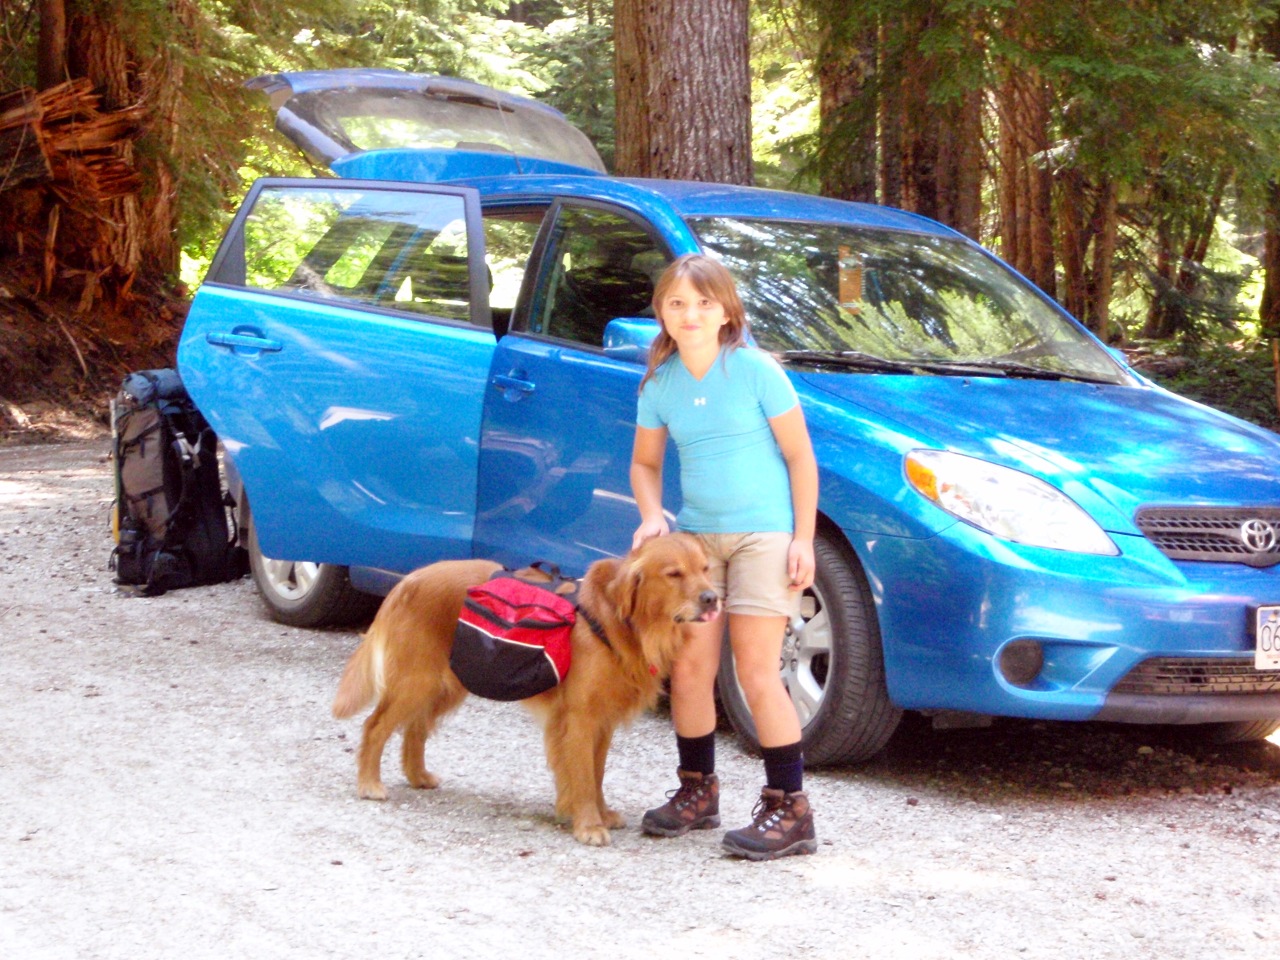 Thursday: Mindy &amp; I place Lili&#8217;s car at the N. Fork Sauk River TH (no pics). Friday: We intend to hike in to Lake Sally Ann, but end up camping at saddle by jct with the PCT. Beth and Cody at the Little Wenatchee TH